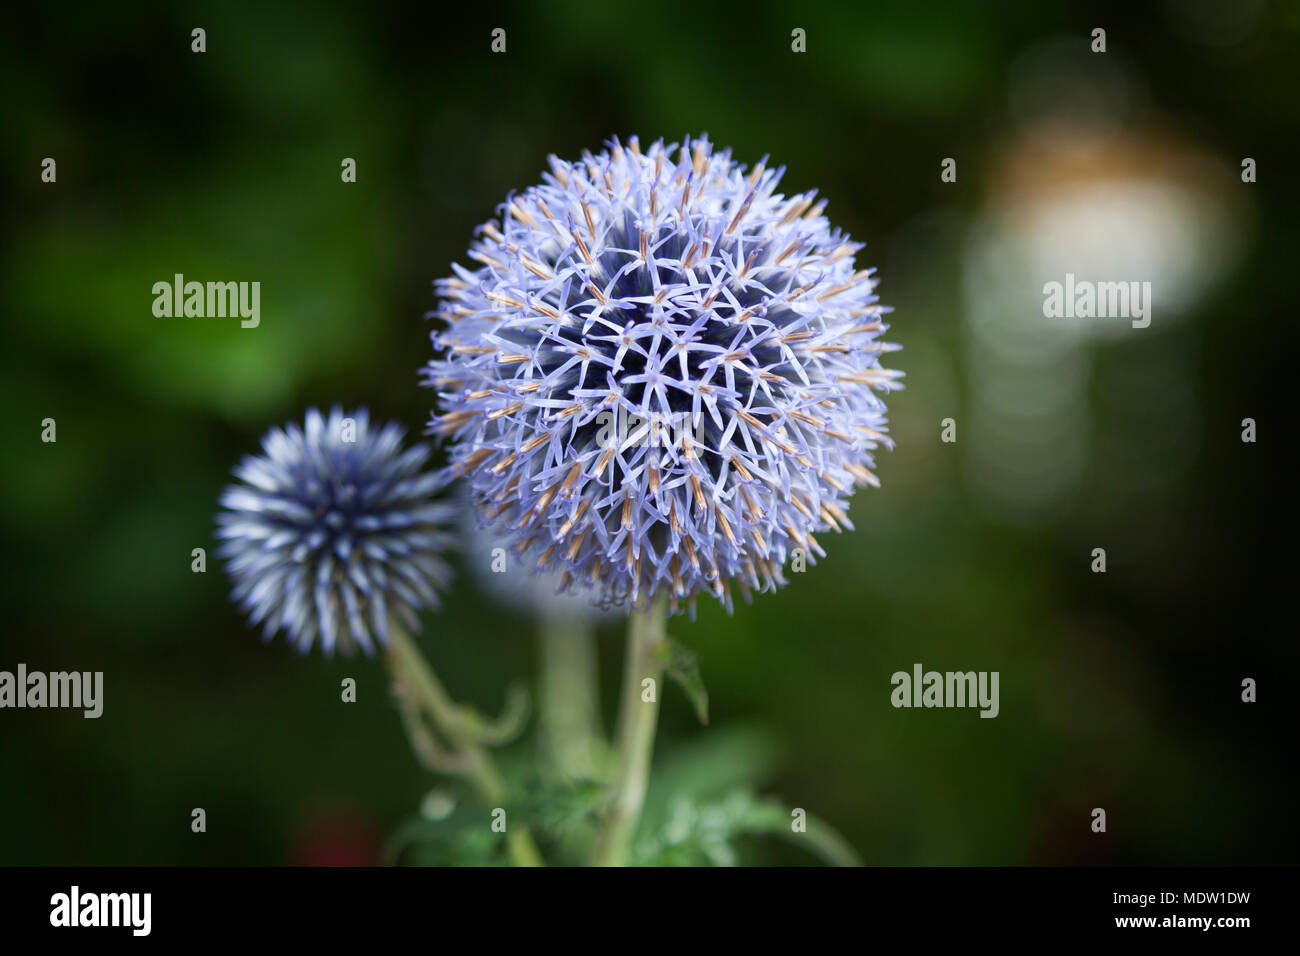 Close up of Blue Allium flower  growing outside in the garden, with a blue thistle just out of focus. Stock Photo